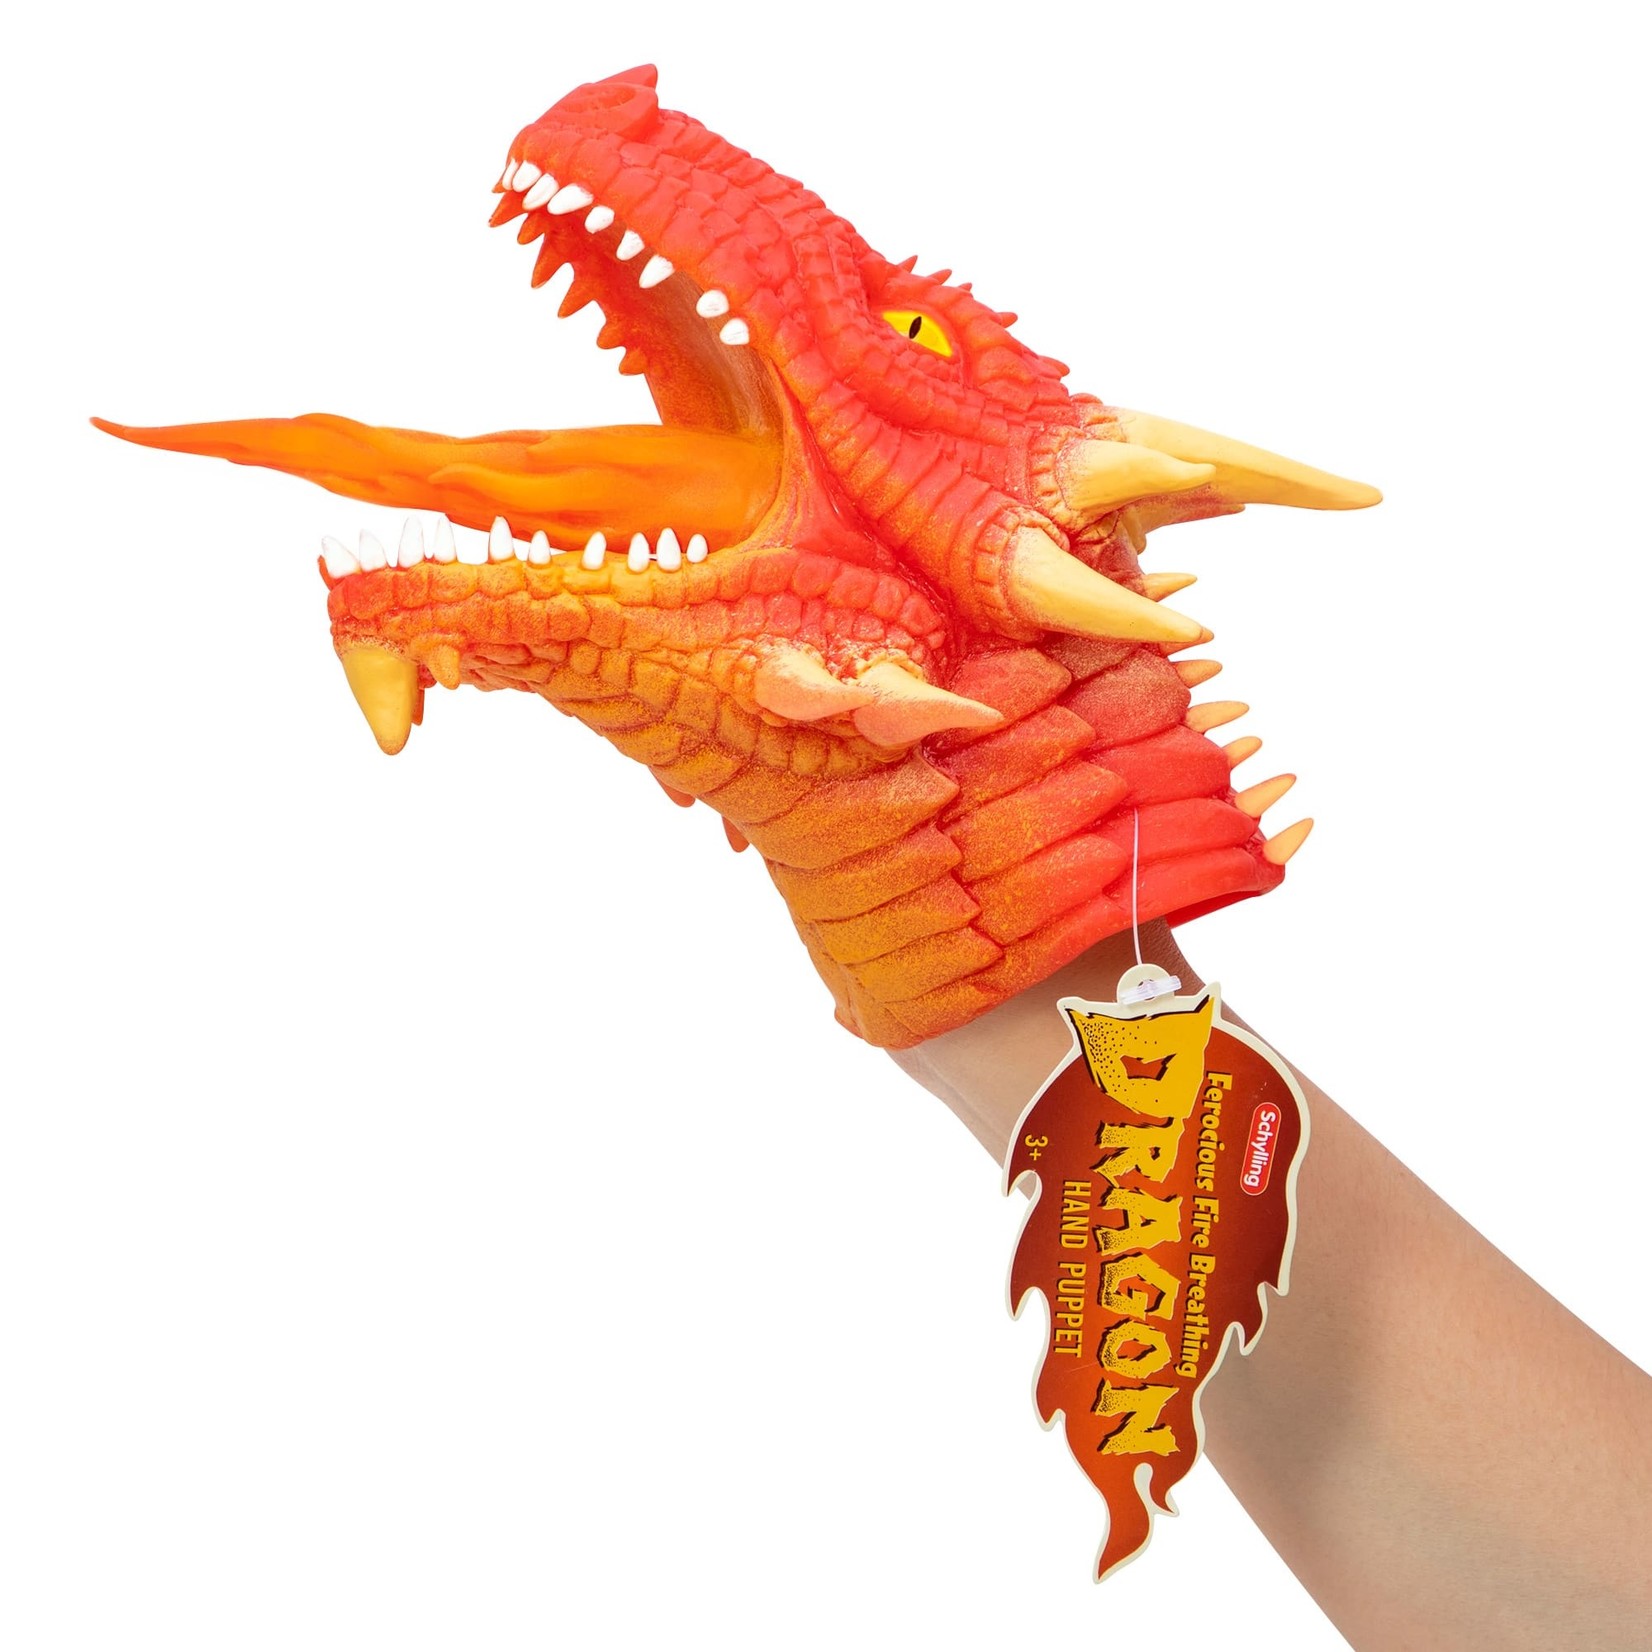 2019 Schylling Dragon Hand puppet NWT 